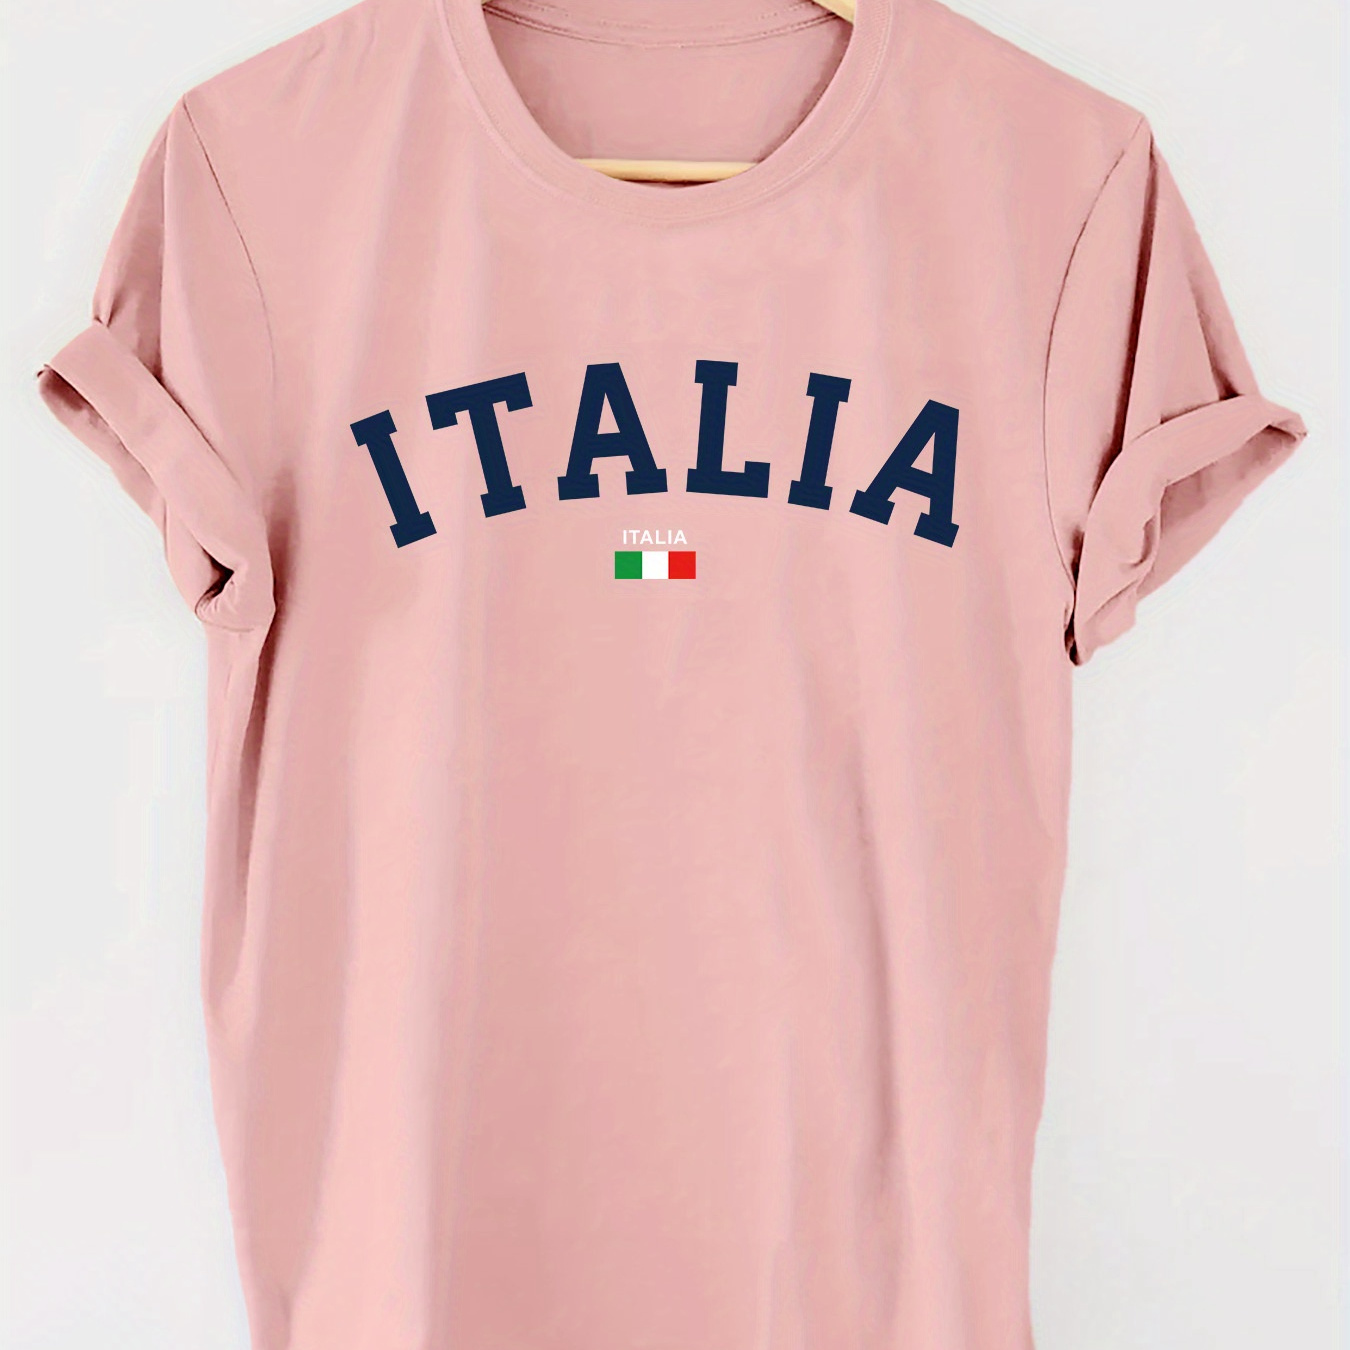 

Italia Print T-shirt, Short Sleeve Crew Neck Casual Top For Summer & Spring, Women's Clothing